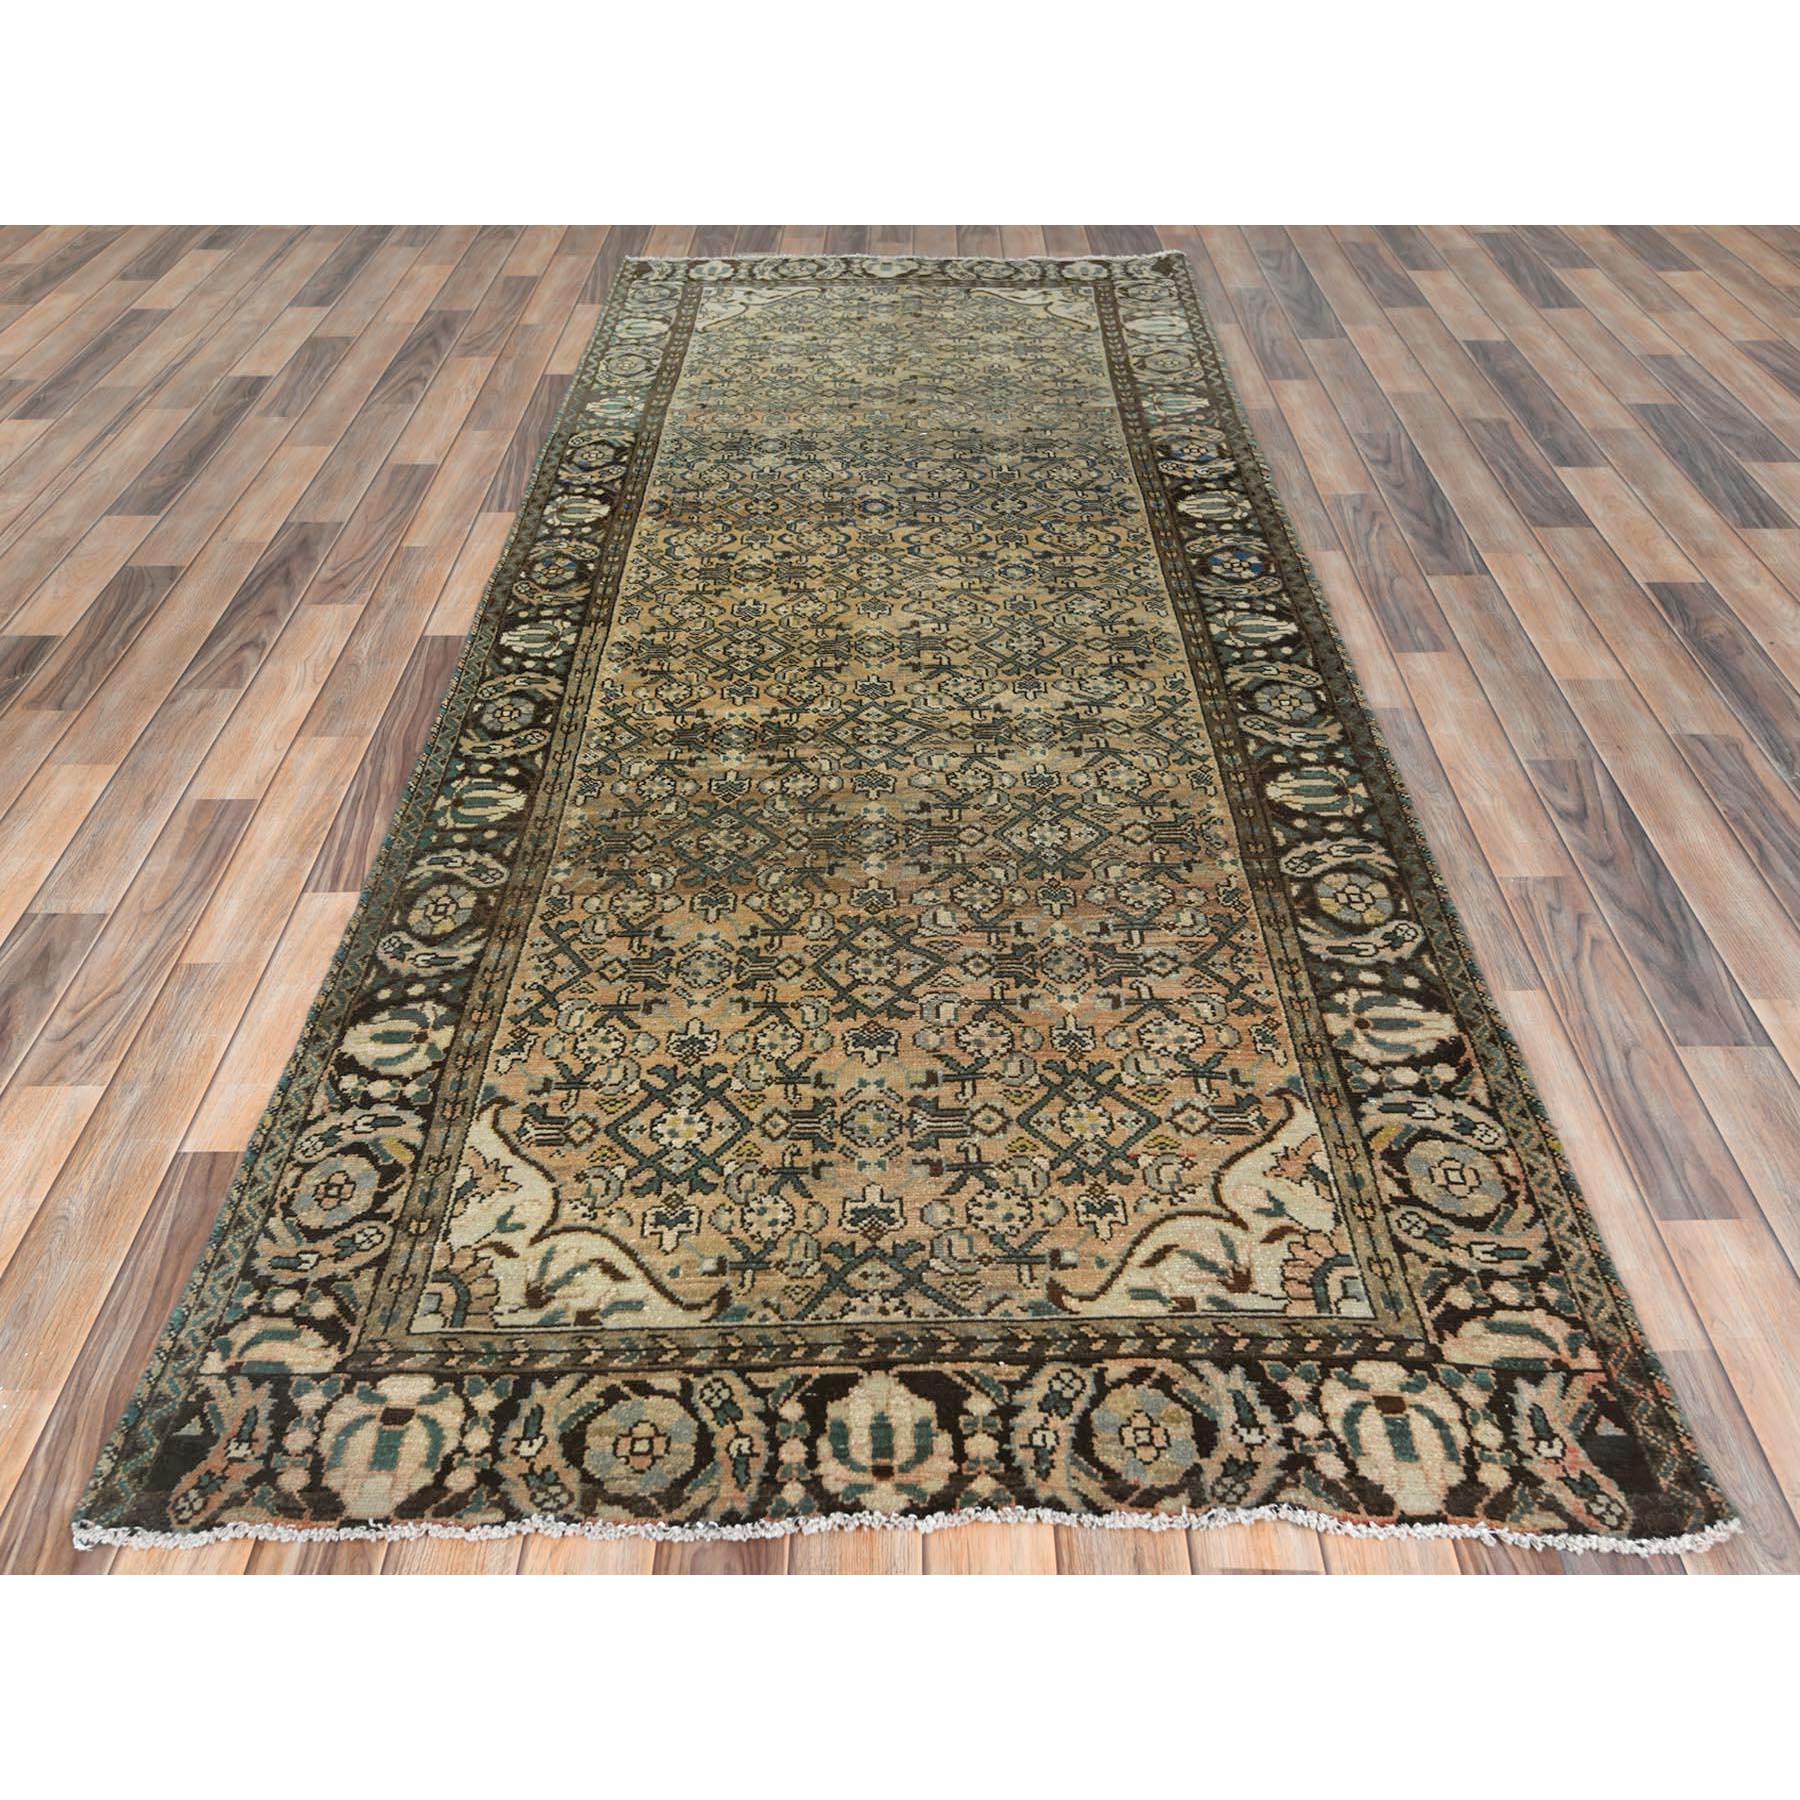 This fabulous Hand-Knotted carpet has been created and designed for extra strength and durability. This rug has been handcrafted for weeks in the traditional method that is used to make
Exact Rug Size in Feet and Inches : 4'0